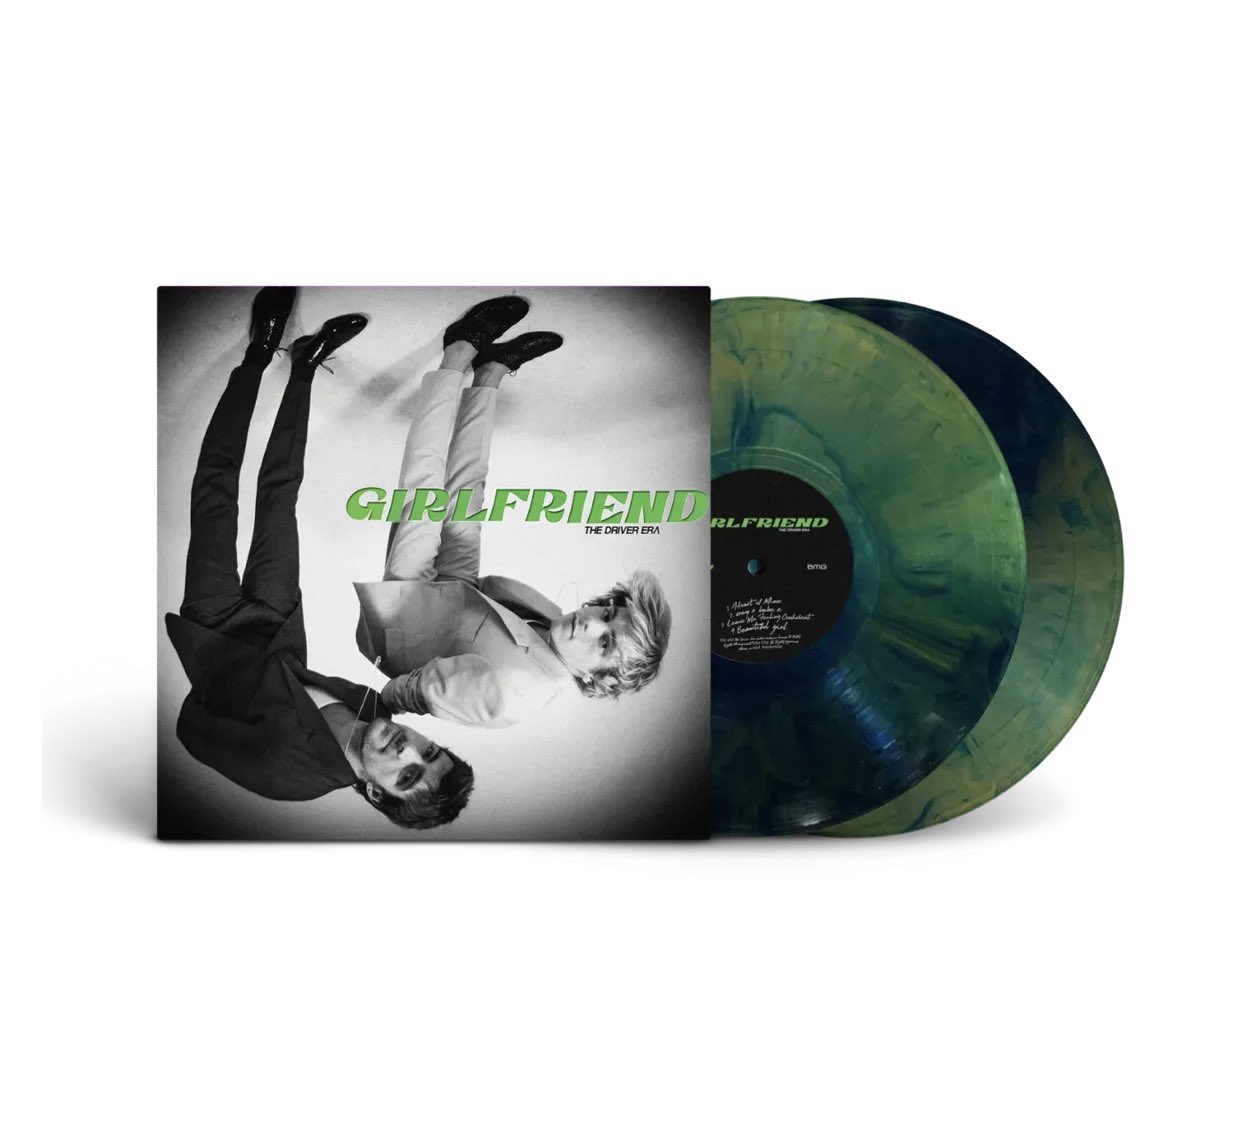 web Watt Raffinere The Driver Era on Twitter: "GIRLFRIEND limited edition signed vinyl and  signed CDs are currently available for pre-order 💚 https://t.co/oLoipsTyQz  https://t.co/ckqFZ13JuZ" / Twitter